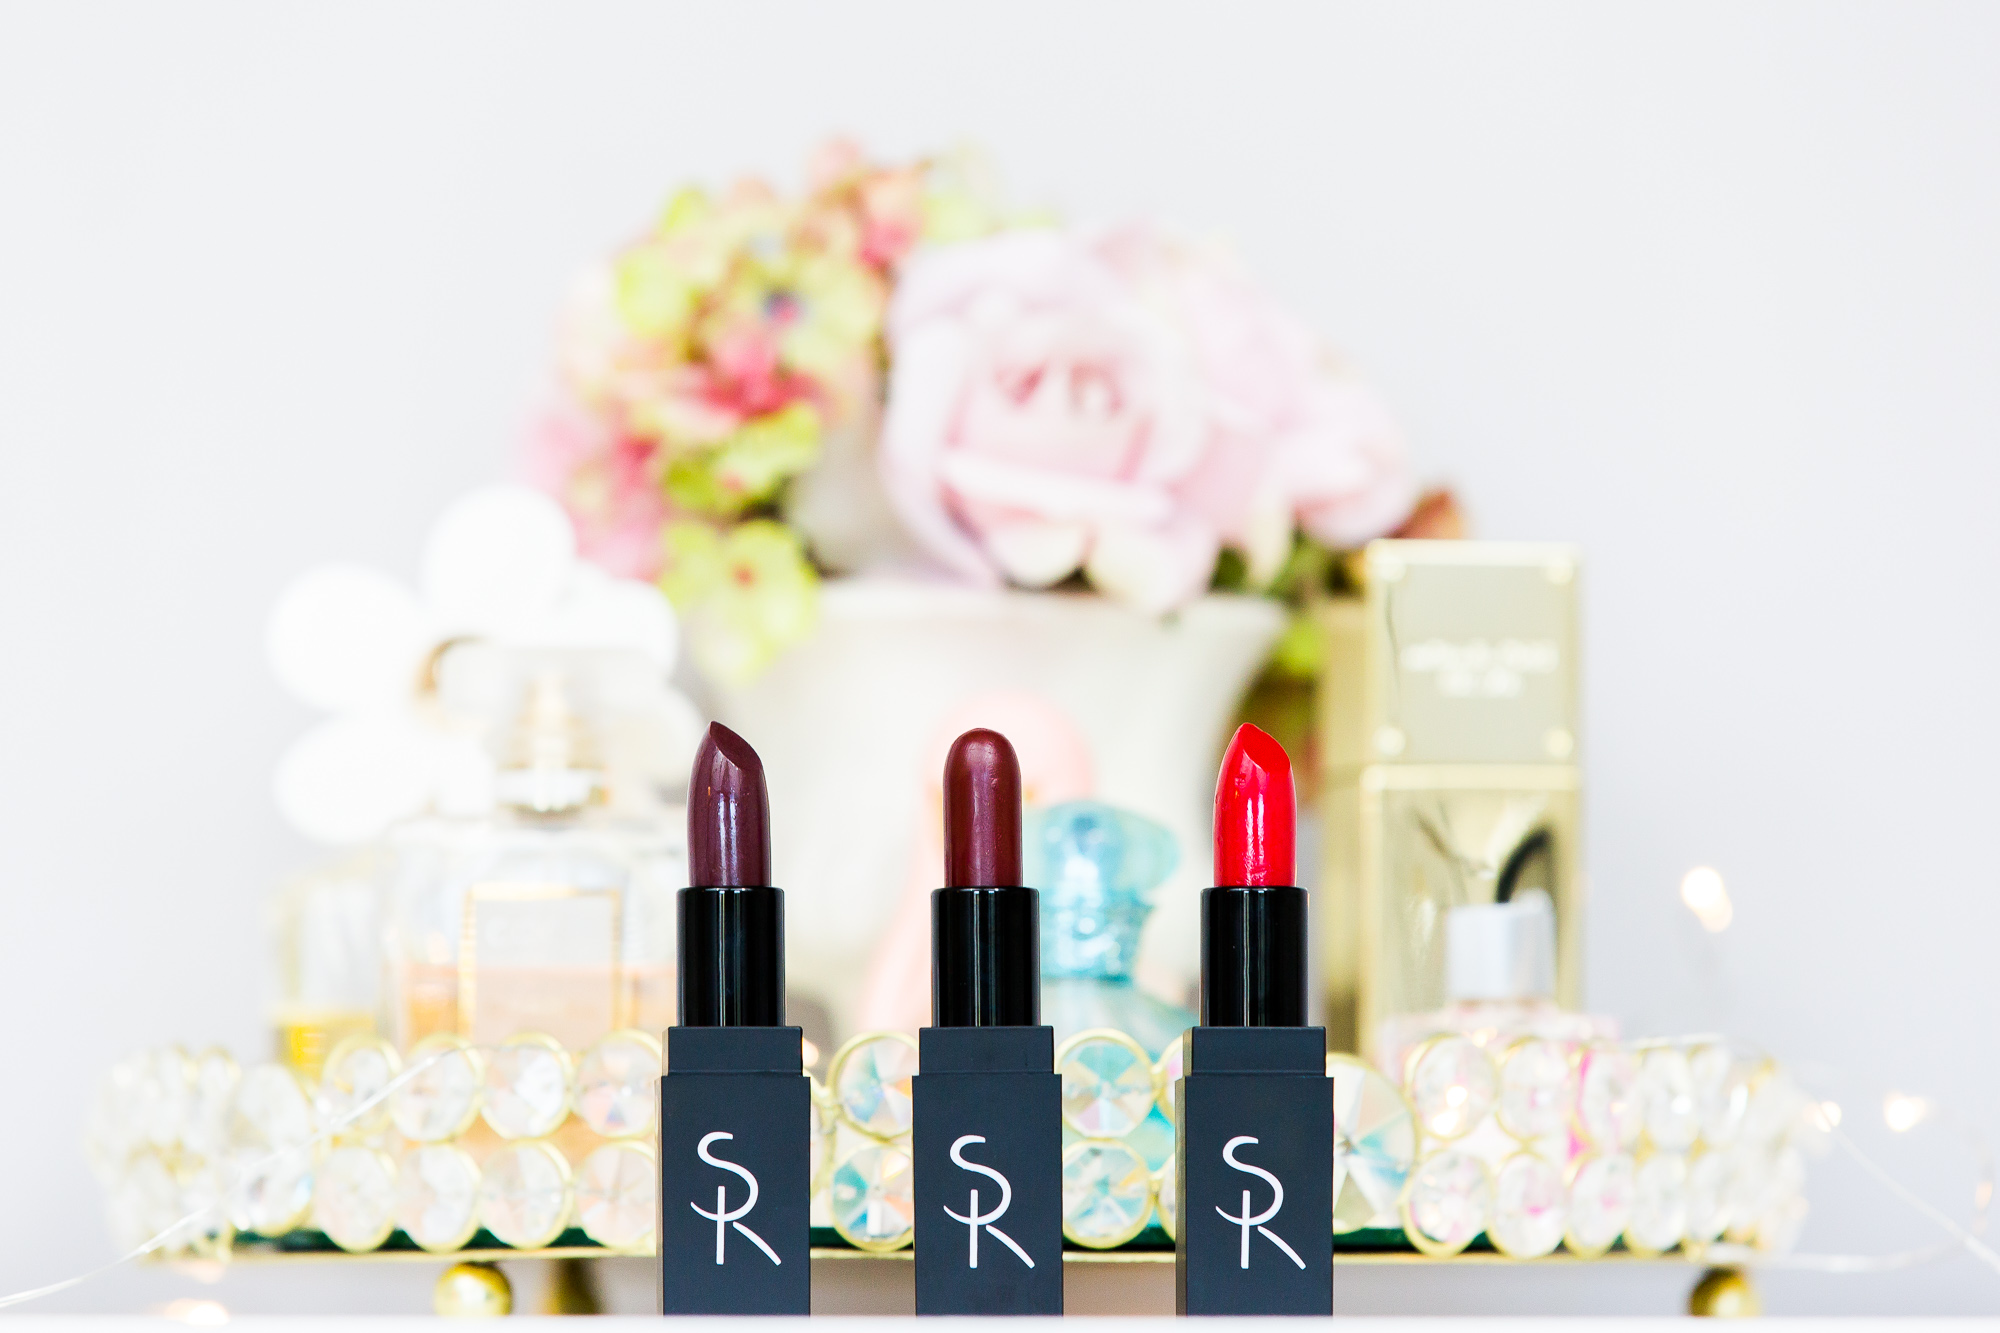 Lifestyle, fashion, and beauty blogger and vlogger Jessica Linn from Linn Style collaborating with SummerReign Cosmetics, a local Durham North Carolina lipstick company started by Ashley Summerville using all natural organic ingredients.